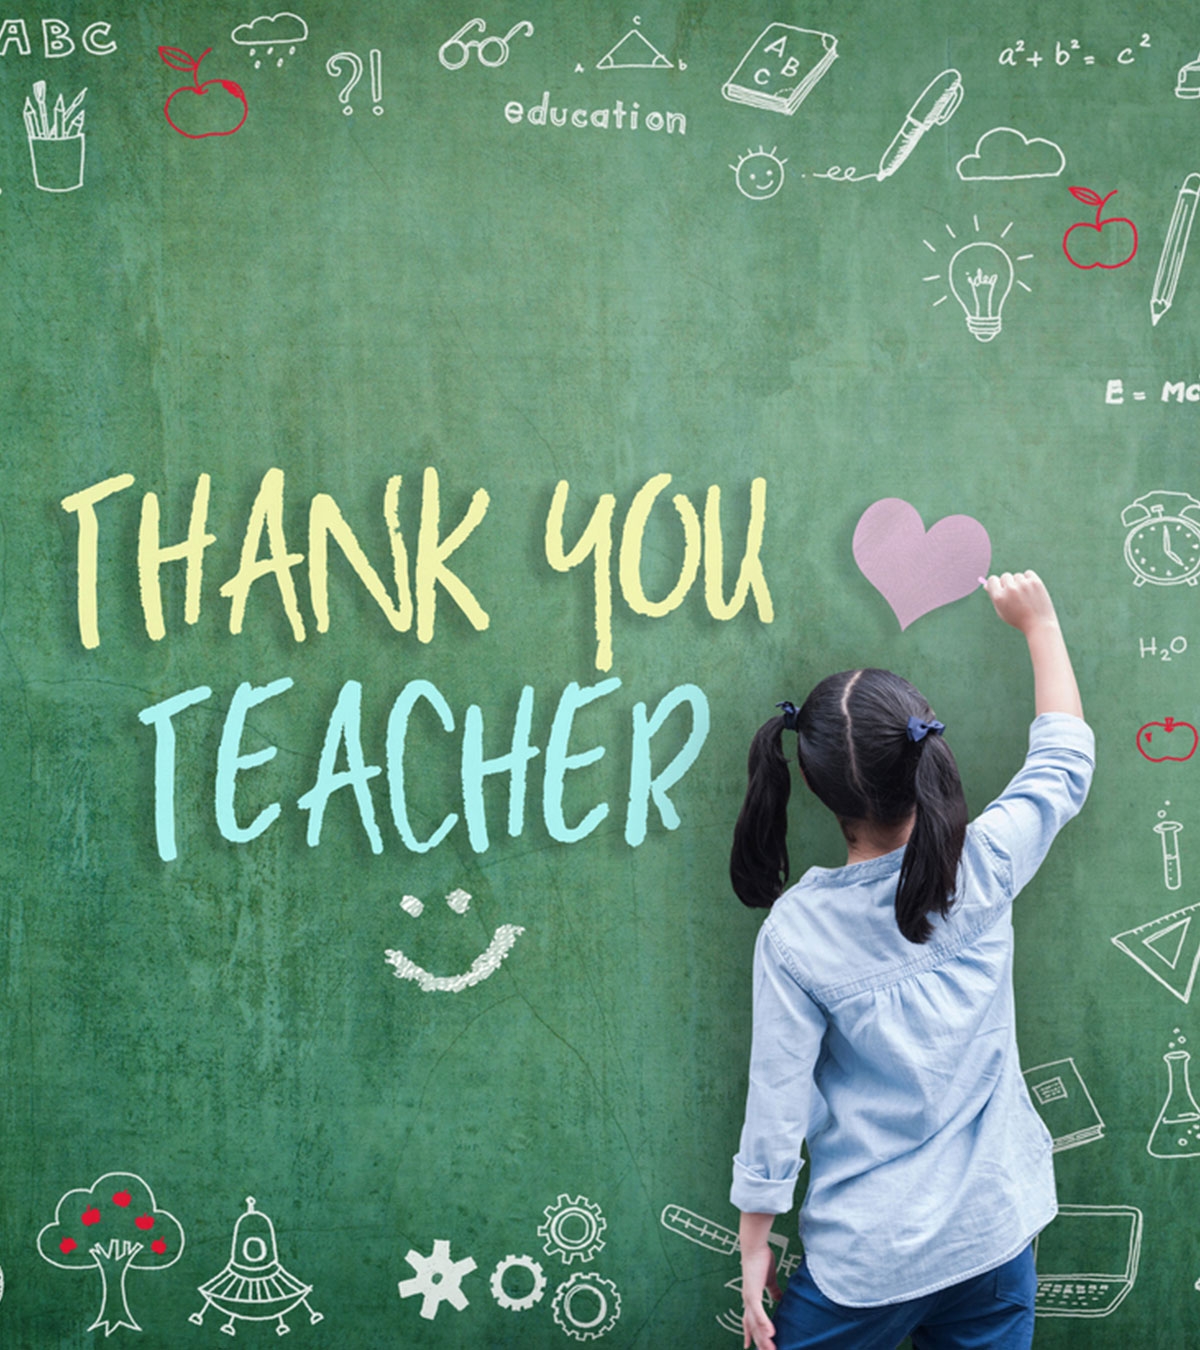 Teachers day's inspiring wishes and quotes